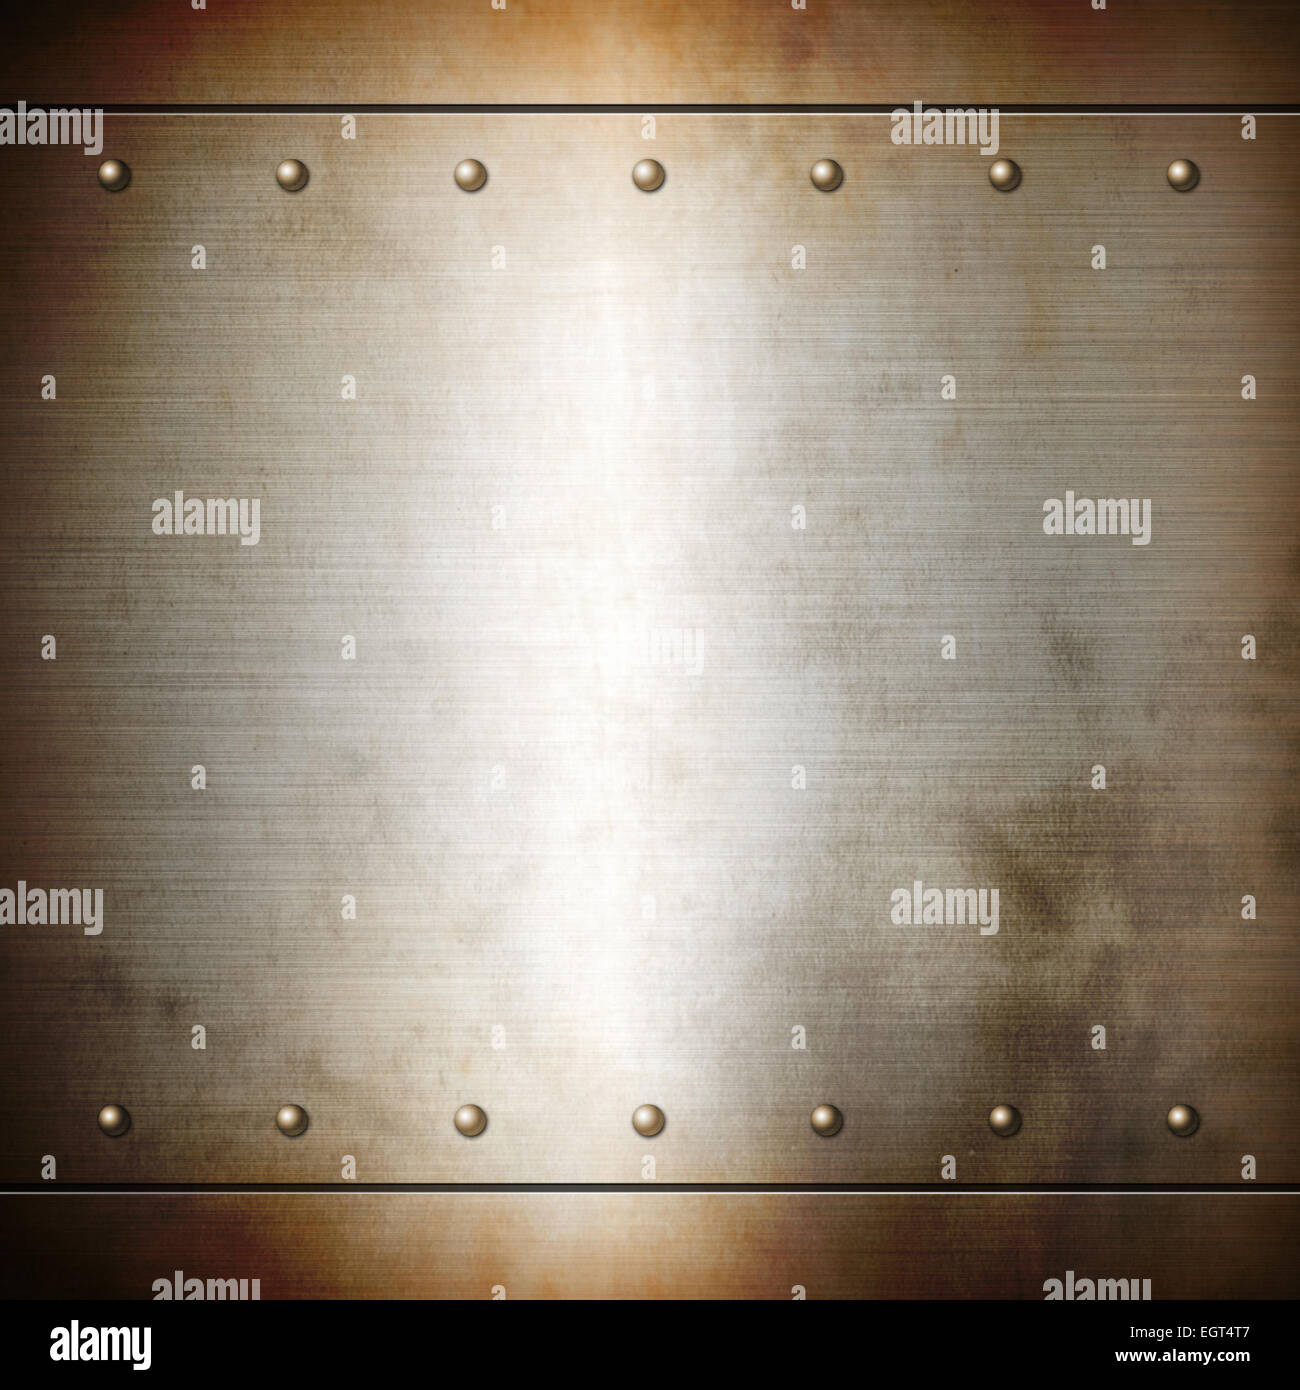 Stainless Steel Plate Rivets Metal Background Stock Photo by ©Ensuper  221569000